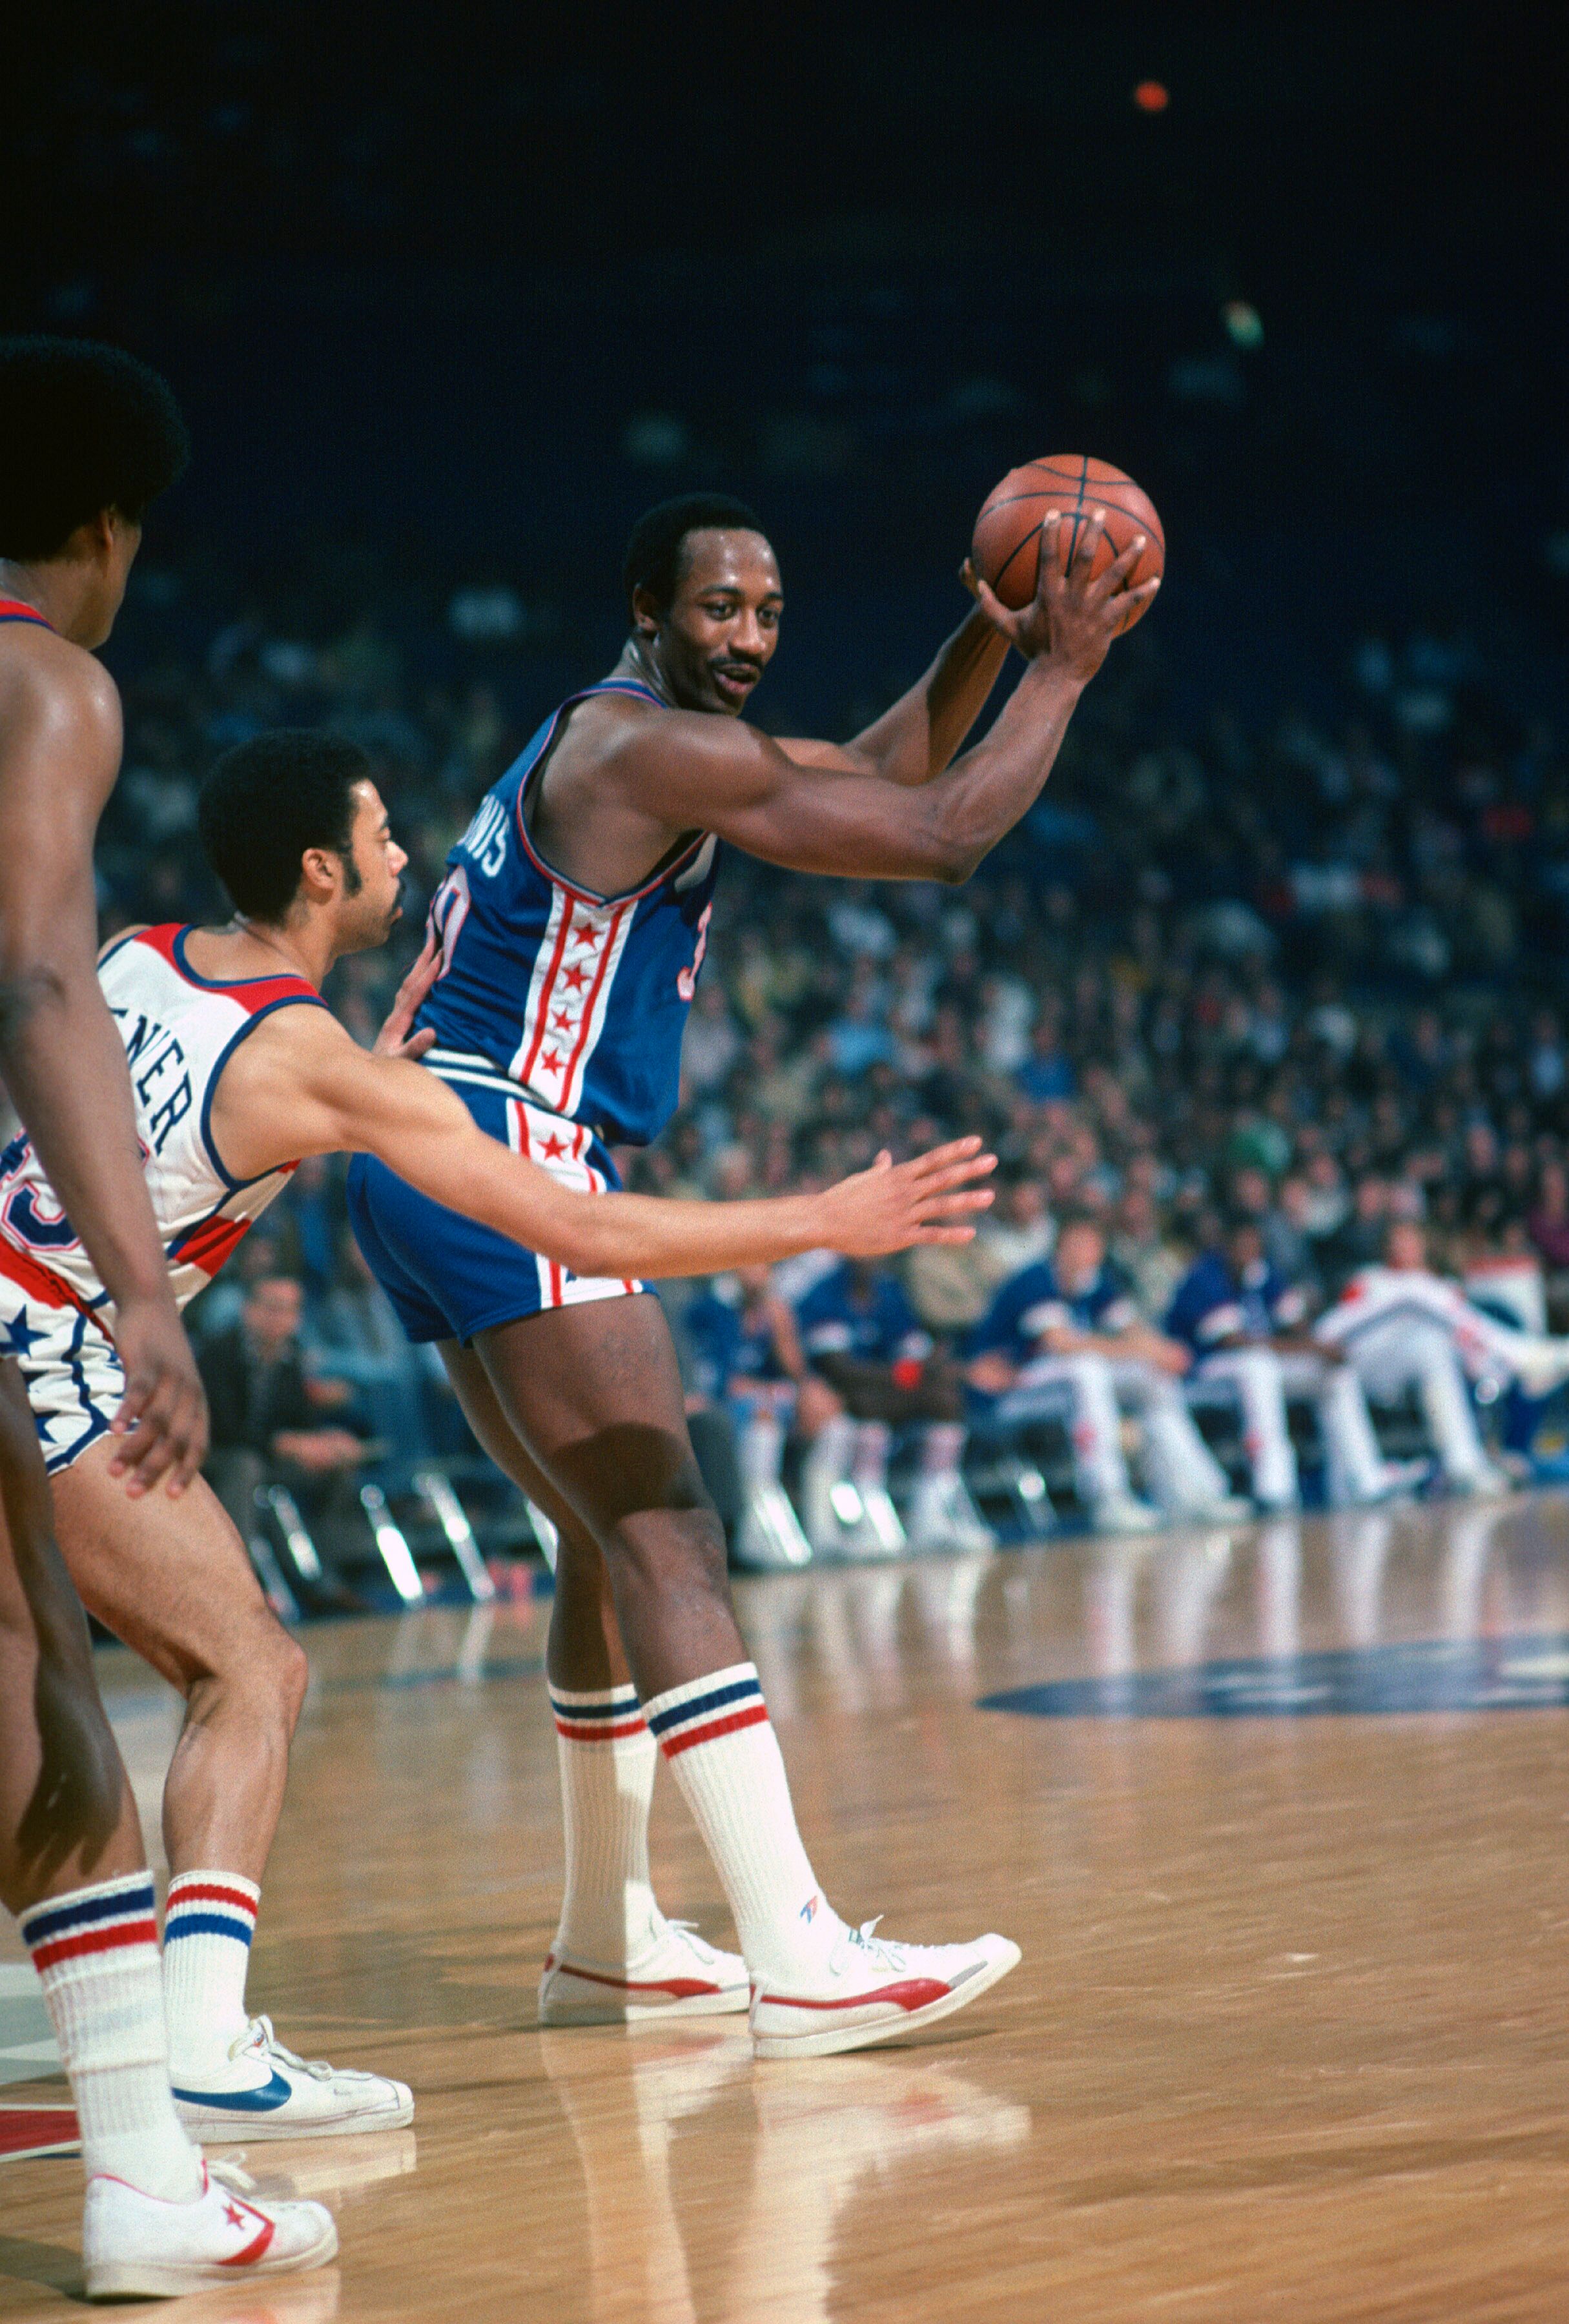 Queen shelter Sophisticated Aaron Dodson on Twitter: "George McGinnis, an ABA MVP and two-time champion  (before joining the NBA in 1975), endorsed Puma from 1973 to 1977. The  first time he wore Pumas in a